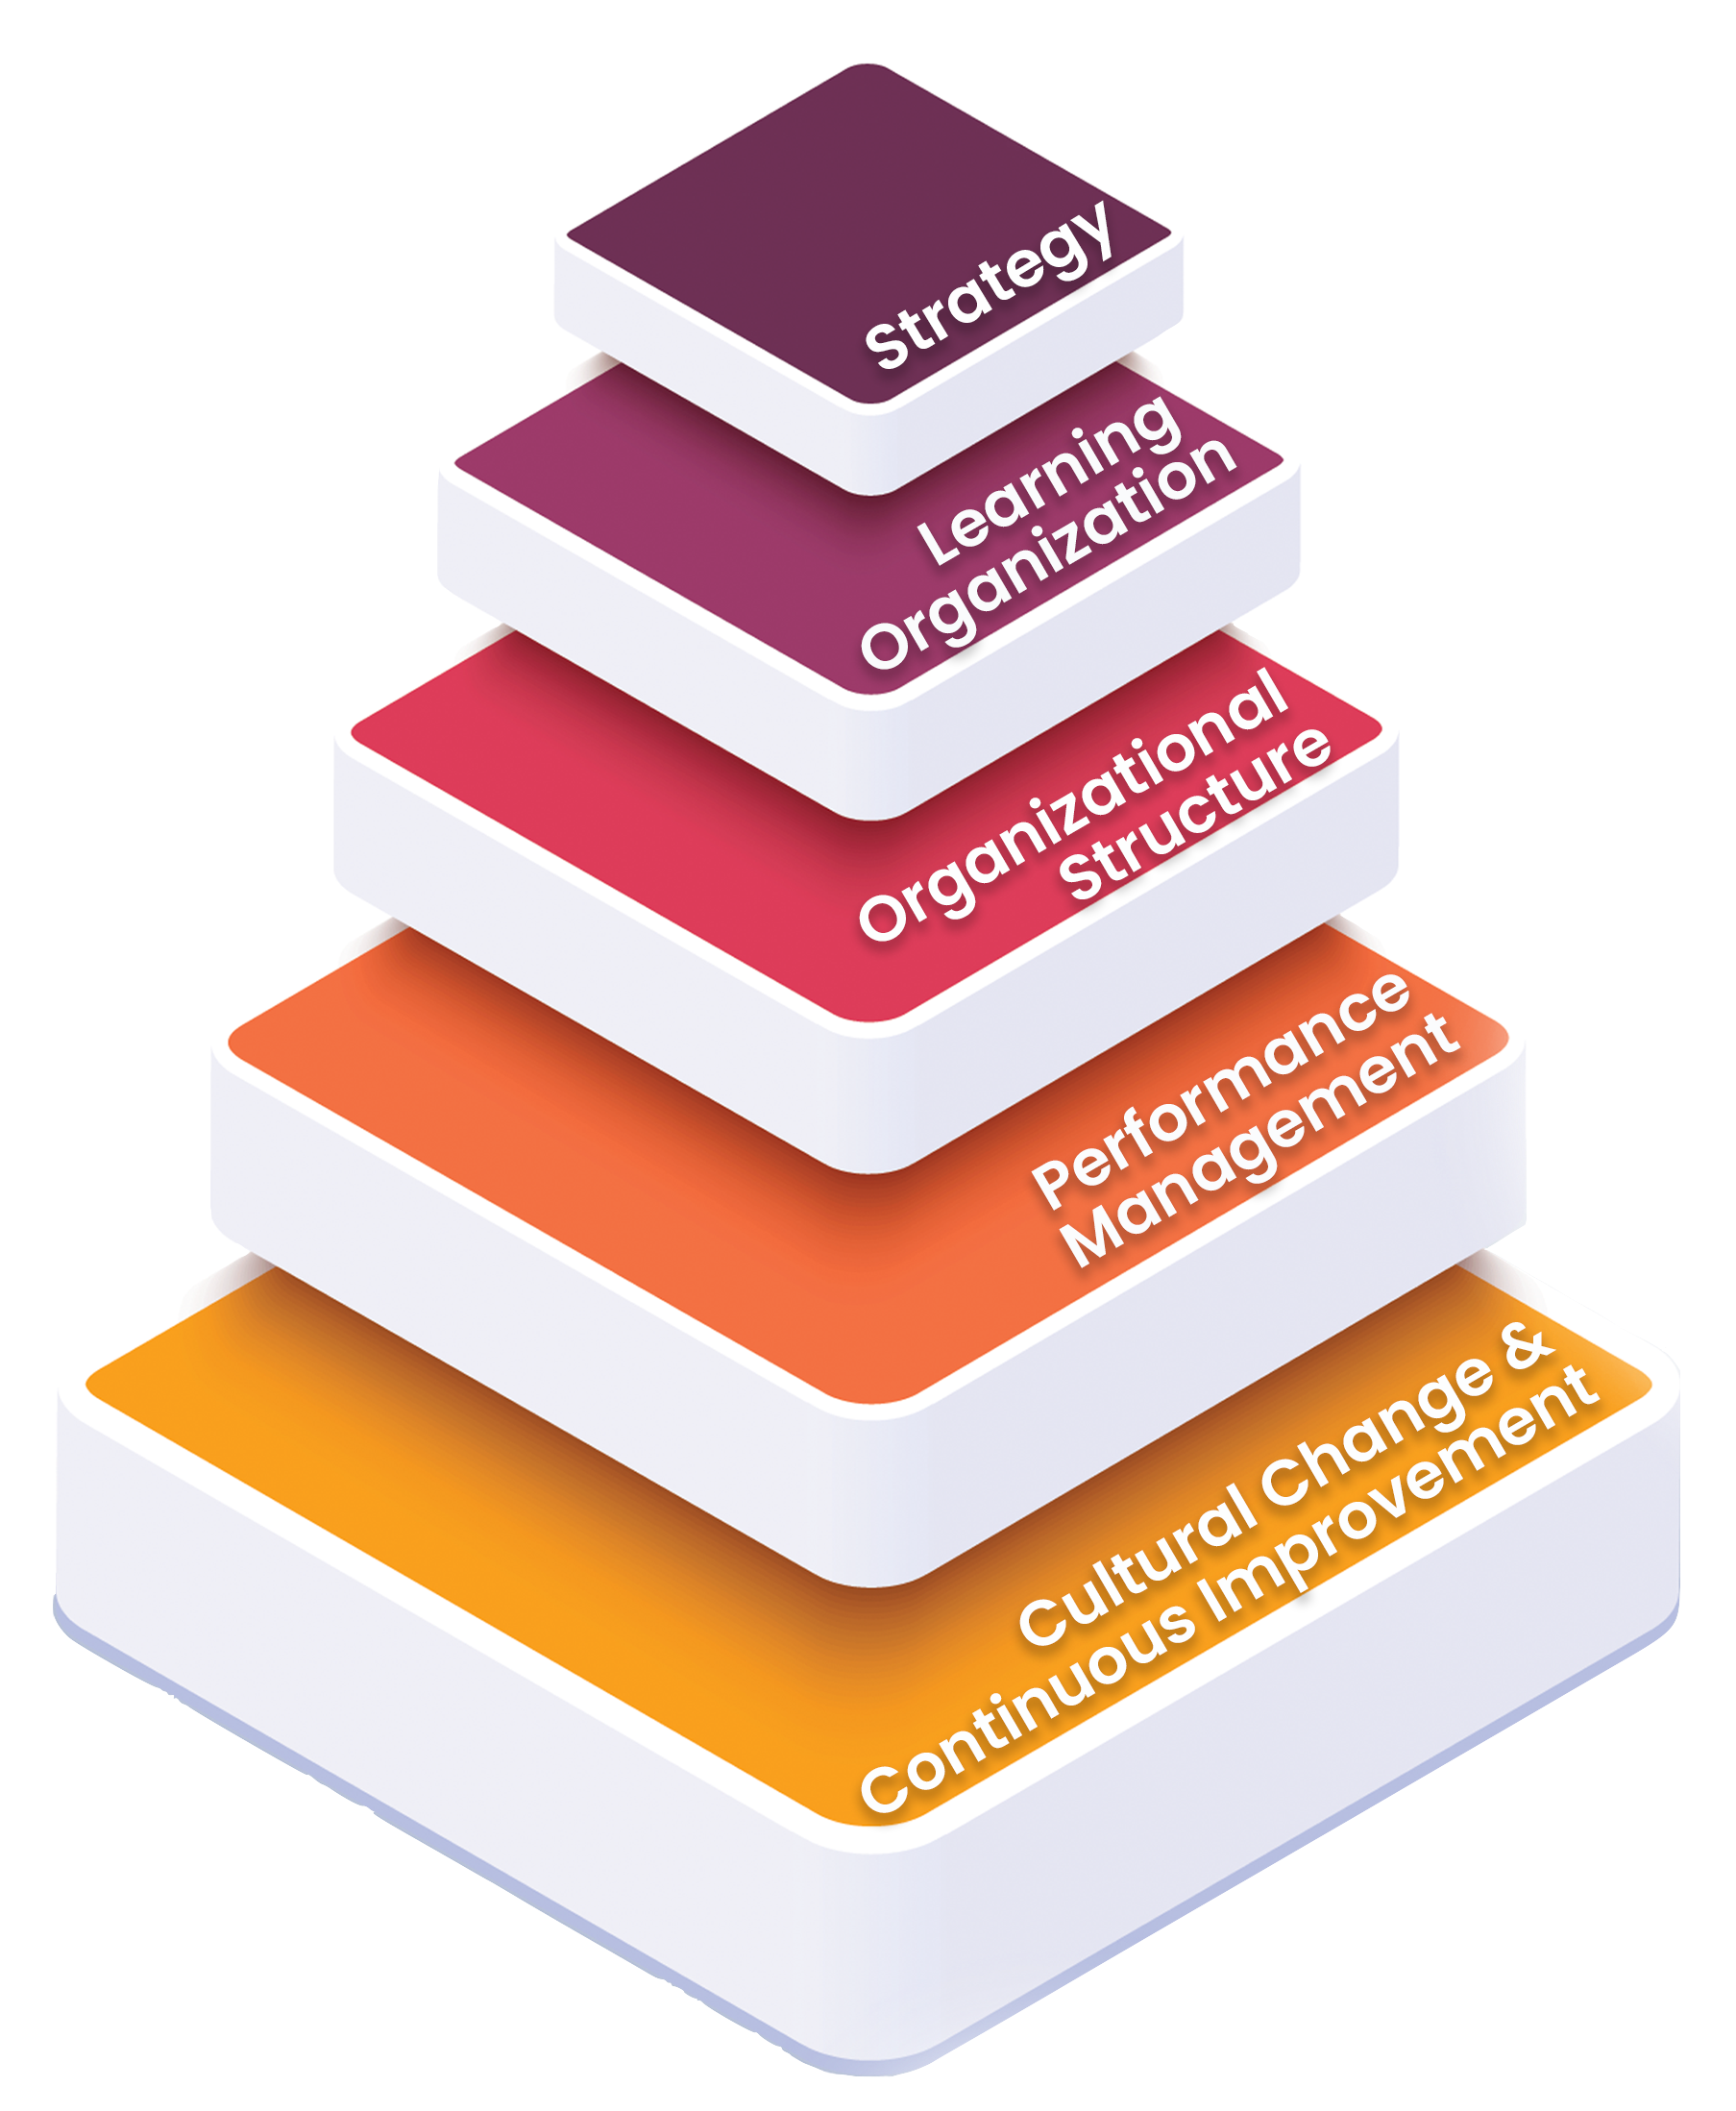 A pyramid graphic with 5 layers – at the base is Cultural Change & Continuous Improvement, then Performance Management, then Organizational Structure, then Learning Organization, then Strategy at the top